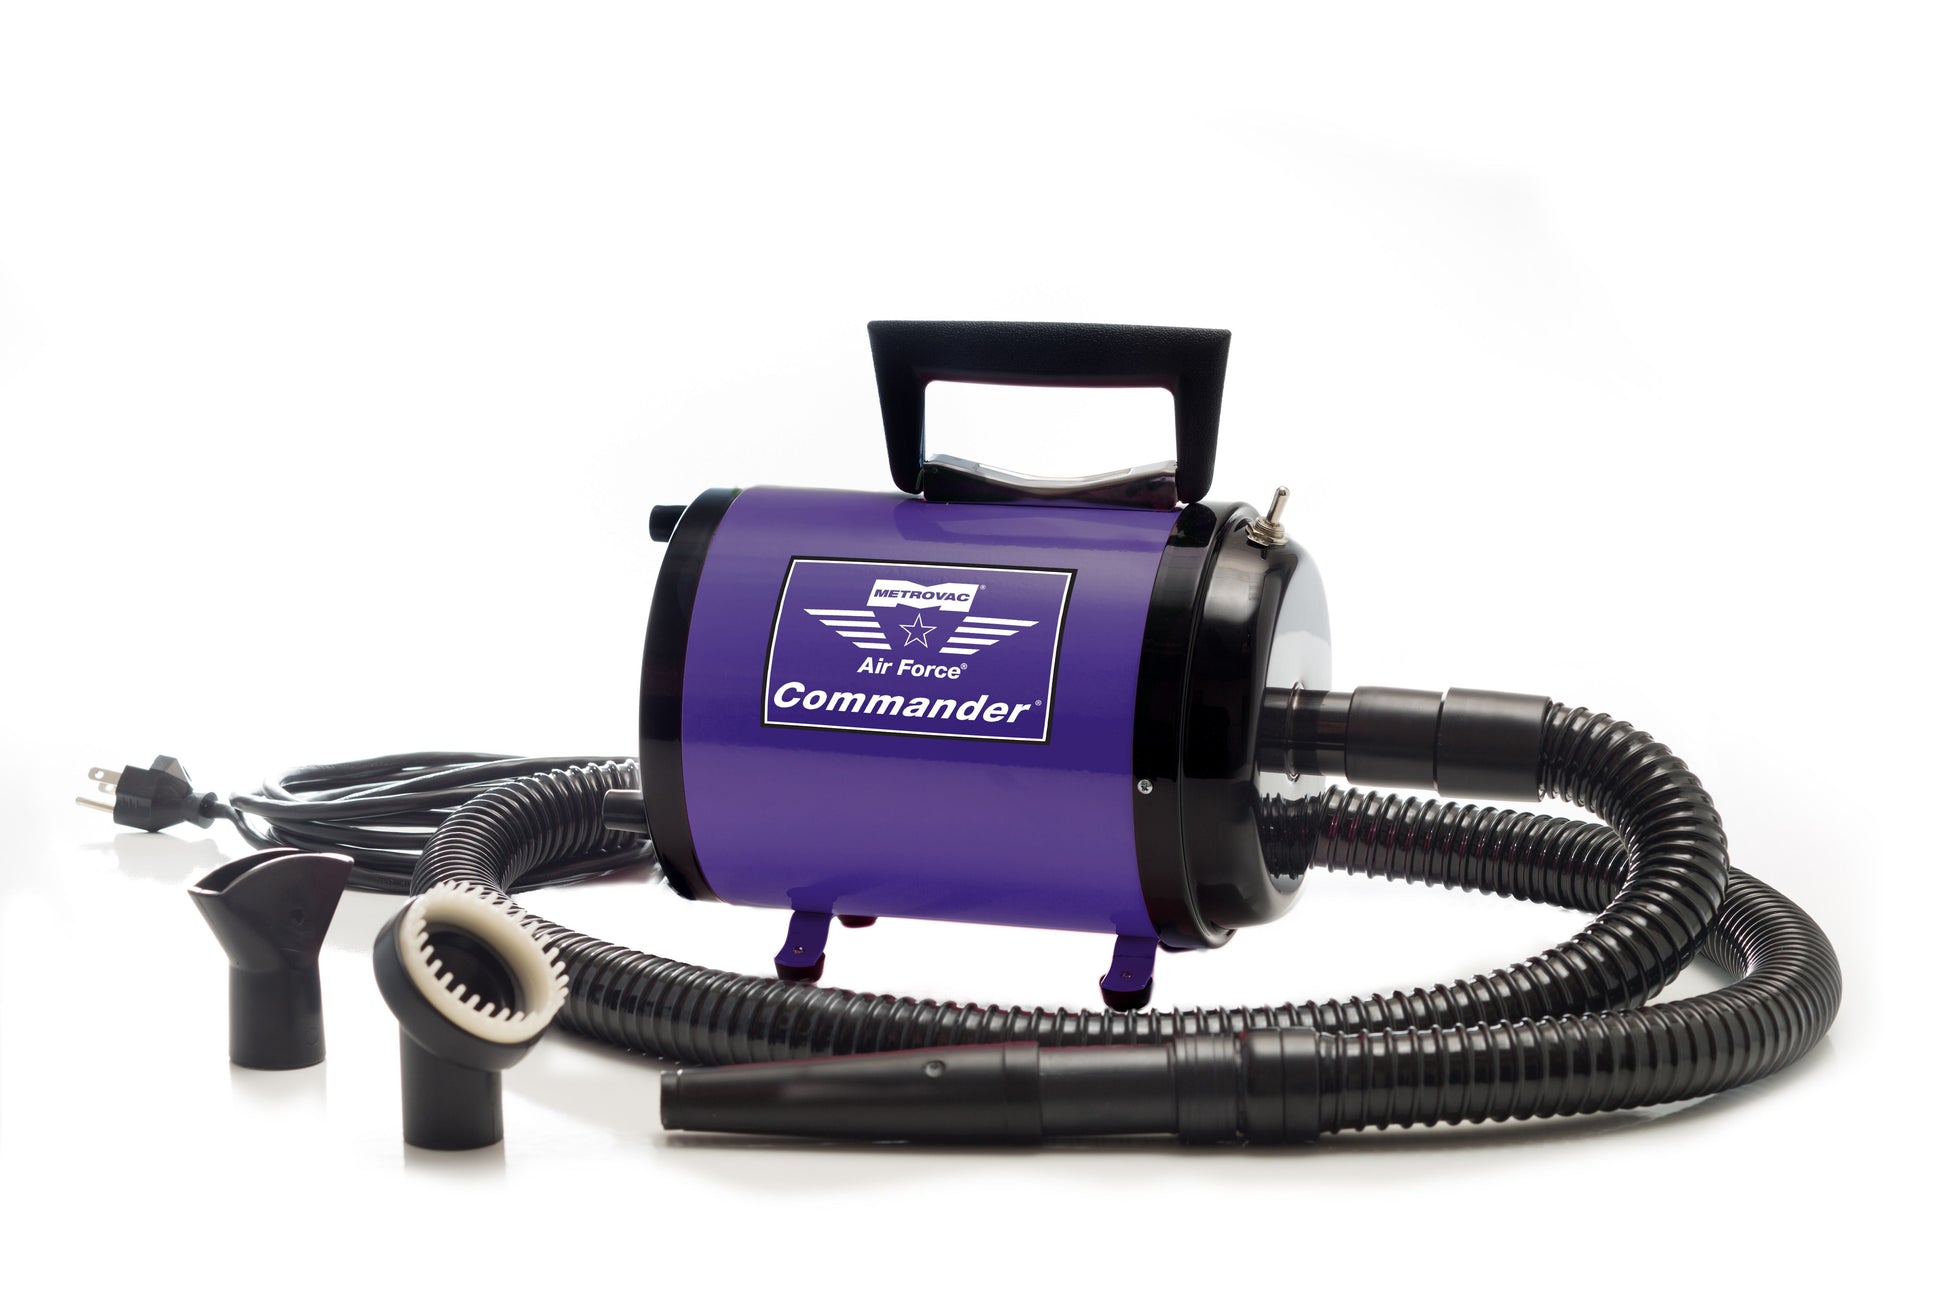 The Air Force® Commander® 2-Speed Professional Pet Dryer by Metrovac is designed to push water of cats and dog. This pet dryer is compact with two speeds, allowing for different coat conditions and different sizes of breeds. It helps detangle mats, shed coat, and makes it possible to examine the skin more closely. Purple